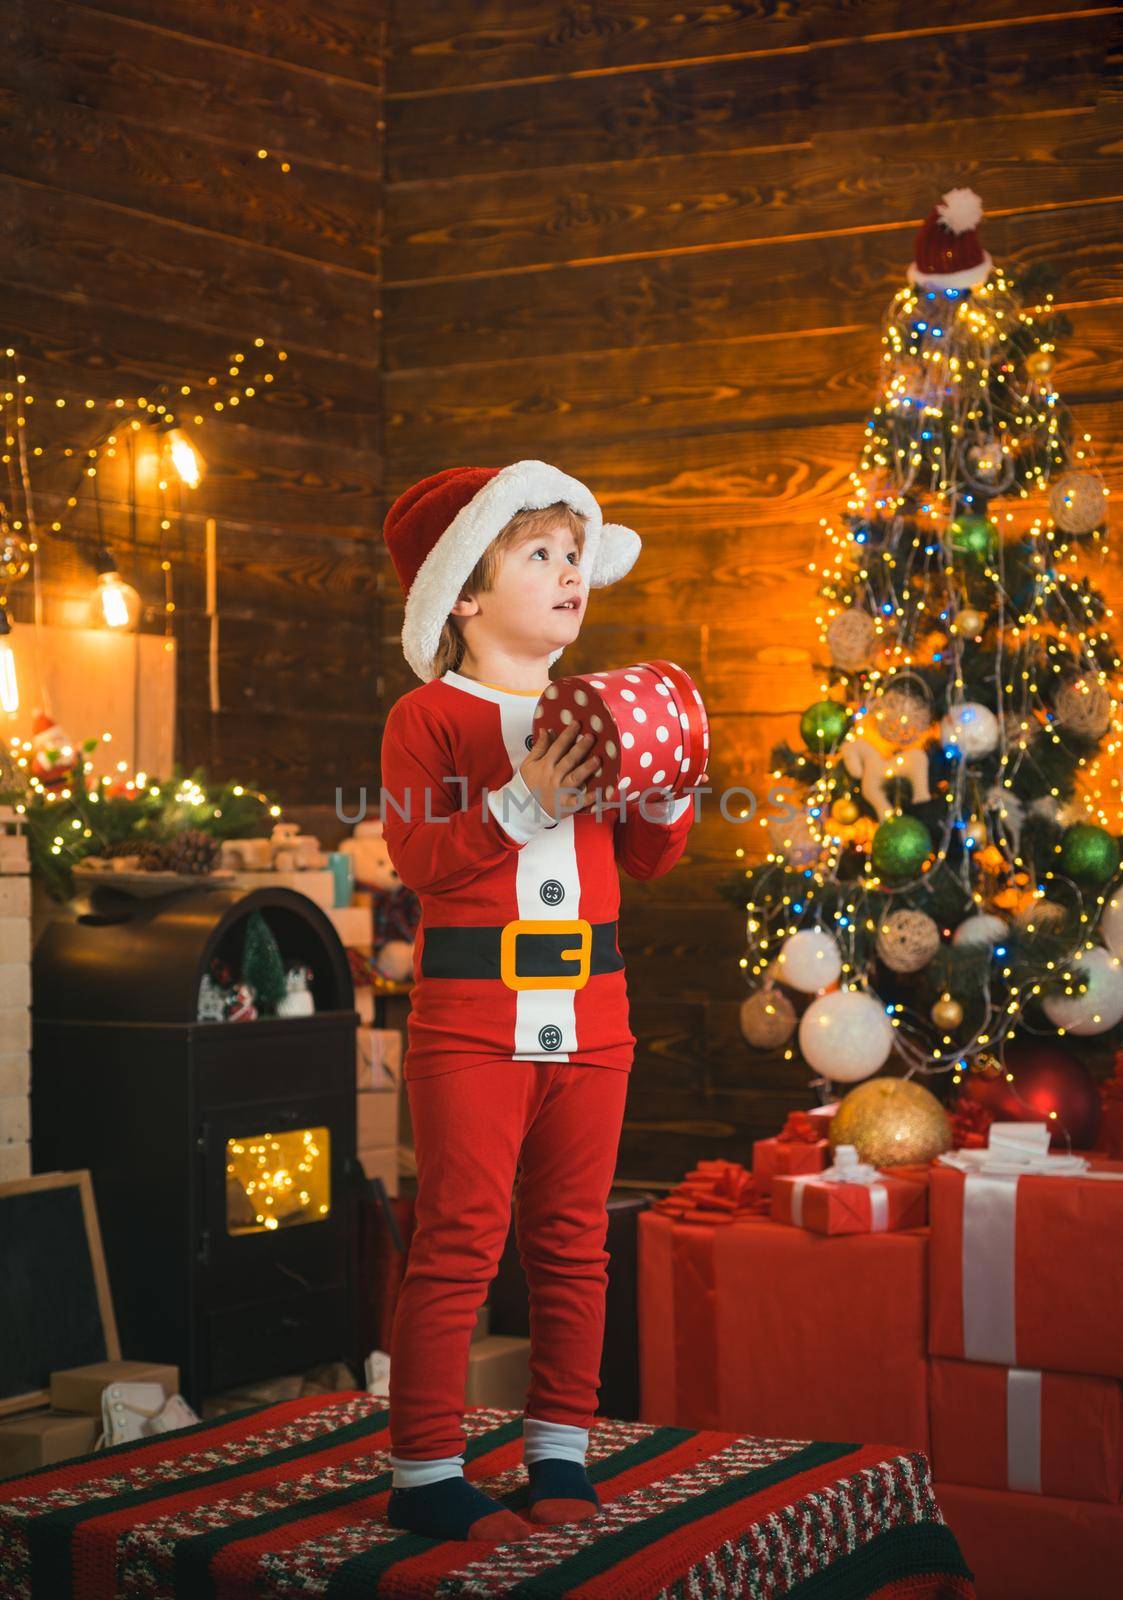 Bright New Years interior. Boy cute child cheerful mood play near Christmas tree. Indoor. Joy and happiness. Christmas shopping concept. Holidays and winter childhood concept. by Tverdokhlib